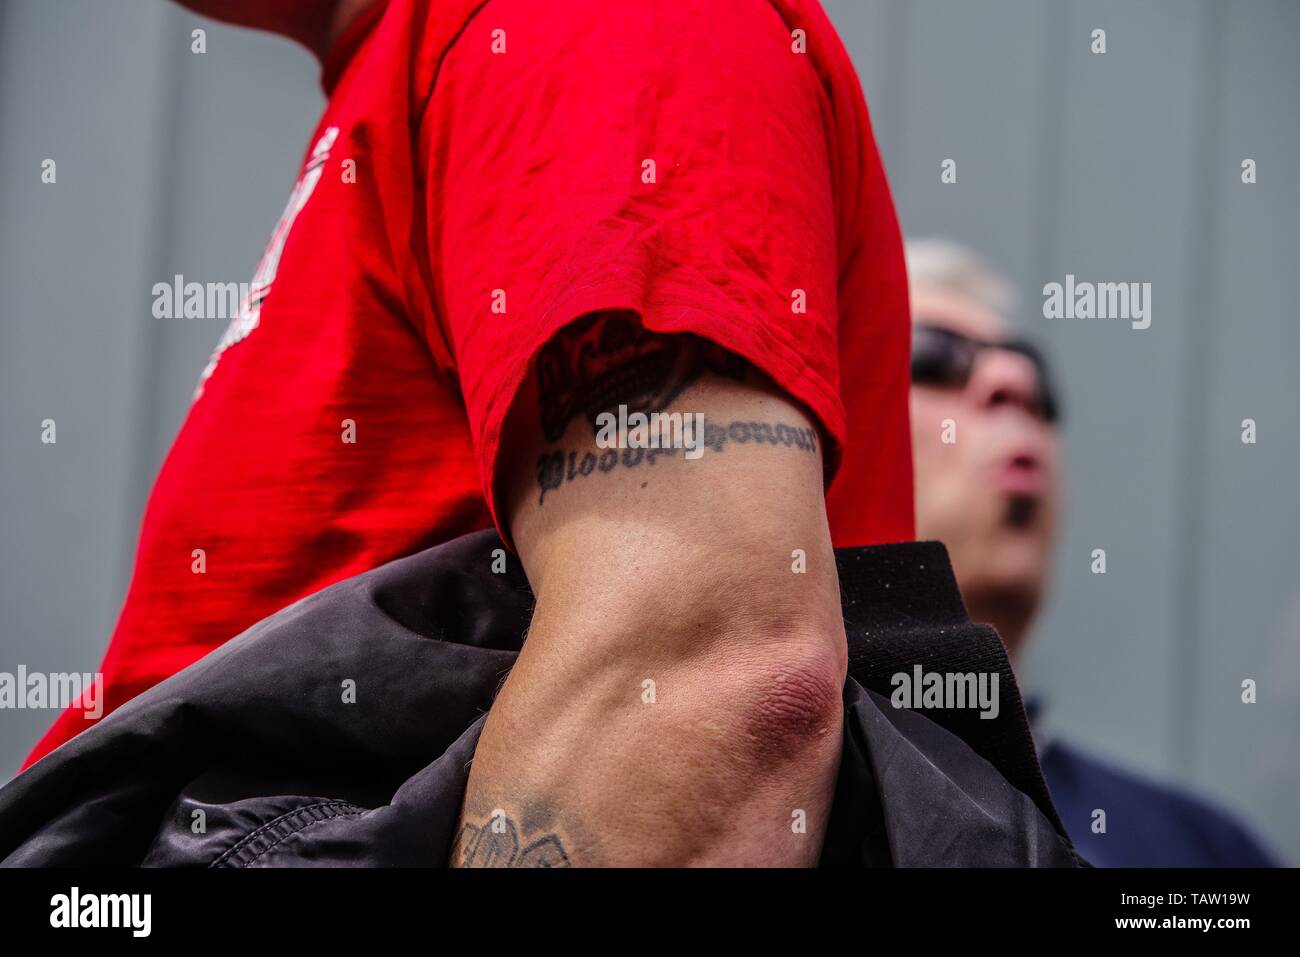 Dortmund, Nordrhein Westfalen, Germany. 25th May, 2019. A neonazi at an event in Dortmund displays a portion of a ''Blood and Honour'' tattoo, denoting membership to this banned terror group, as well as an illegal Totenkopf. Prior to the European Elections, the neonazi party Die Rechte (The Right) organized a rally in the German city of Dortmund to promote their candidate, the incarcerated Holocaust denier Ursula Haverbeck. The demonstration and march were organized by prominent local political figure and neonazi activist Michael Brueck (Michael BrÃ¼ck) who enlisted the help of not only Germ Stock Photo